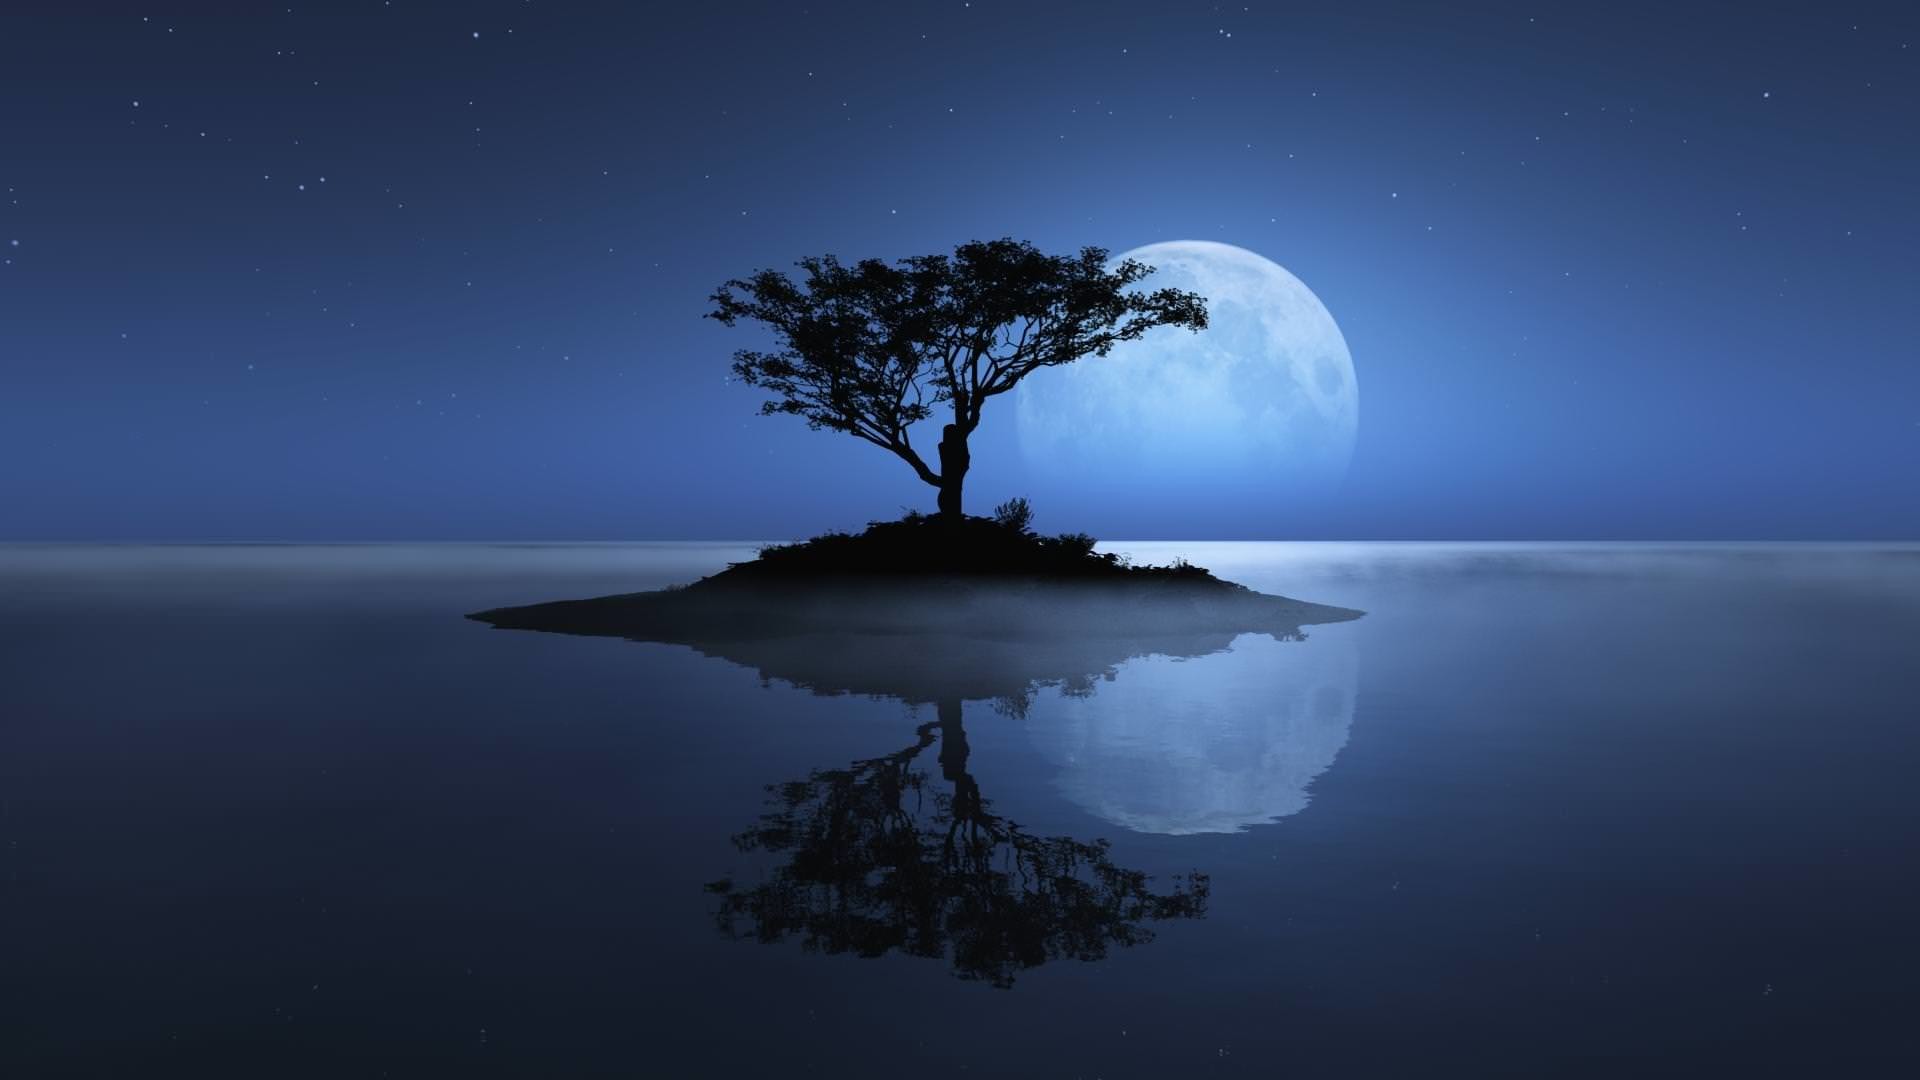 1920x1080 Birds and tree under the blue moon wallpaper Fantasy wallpapers